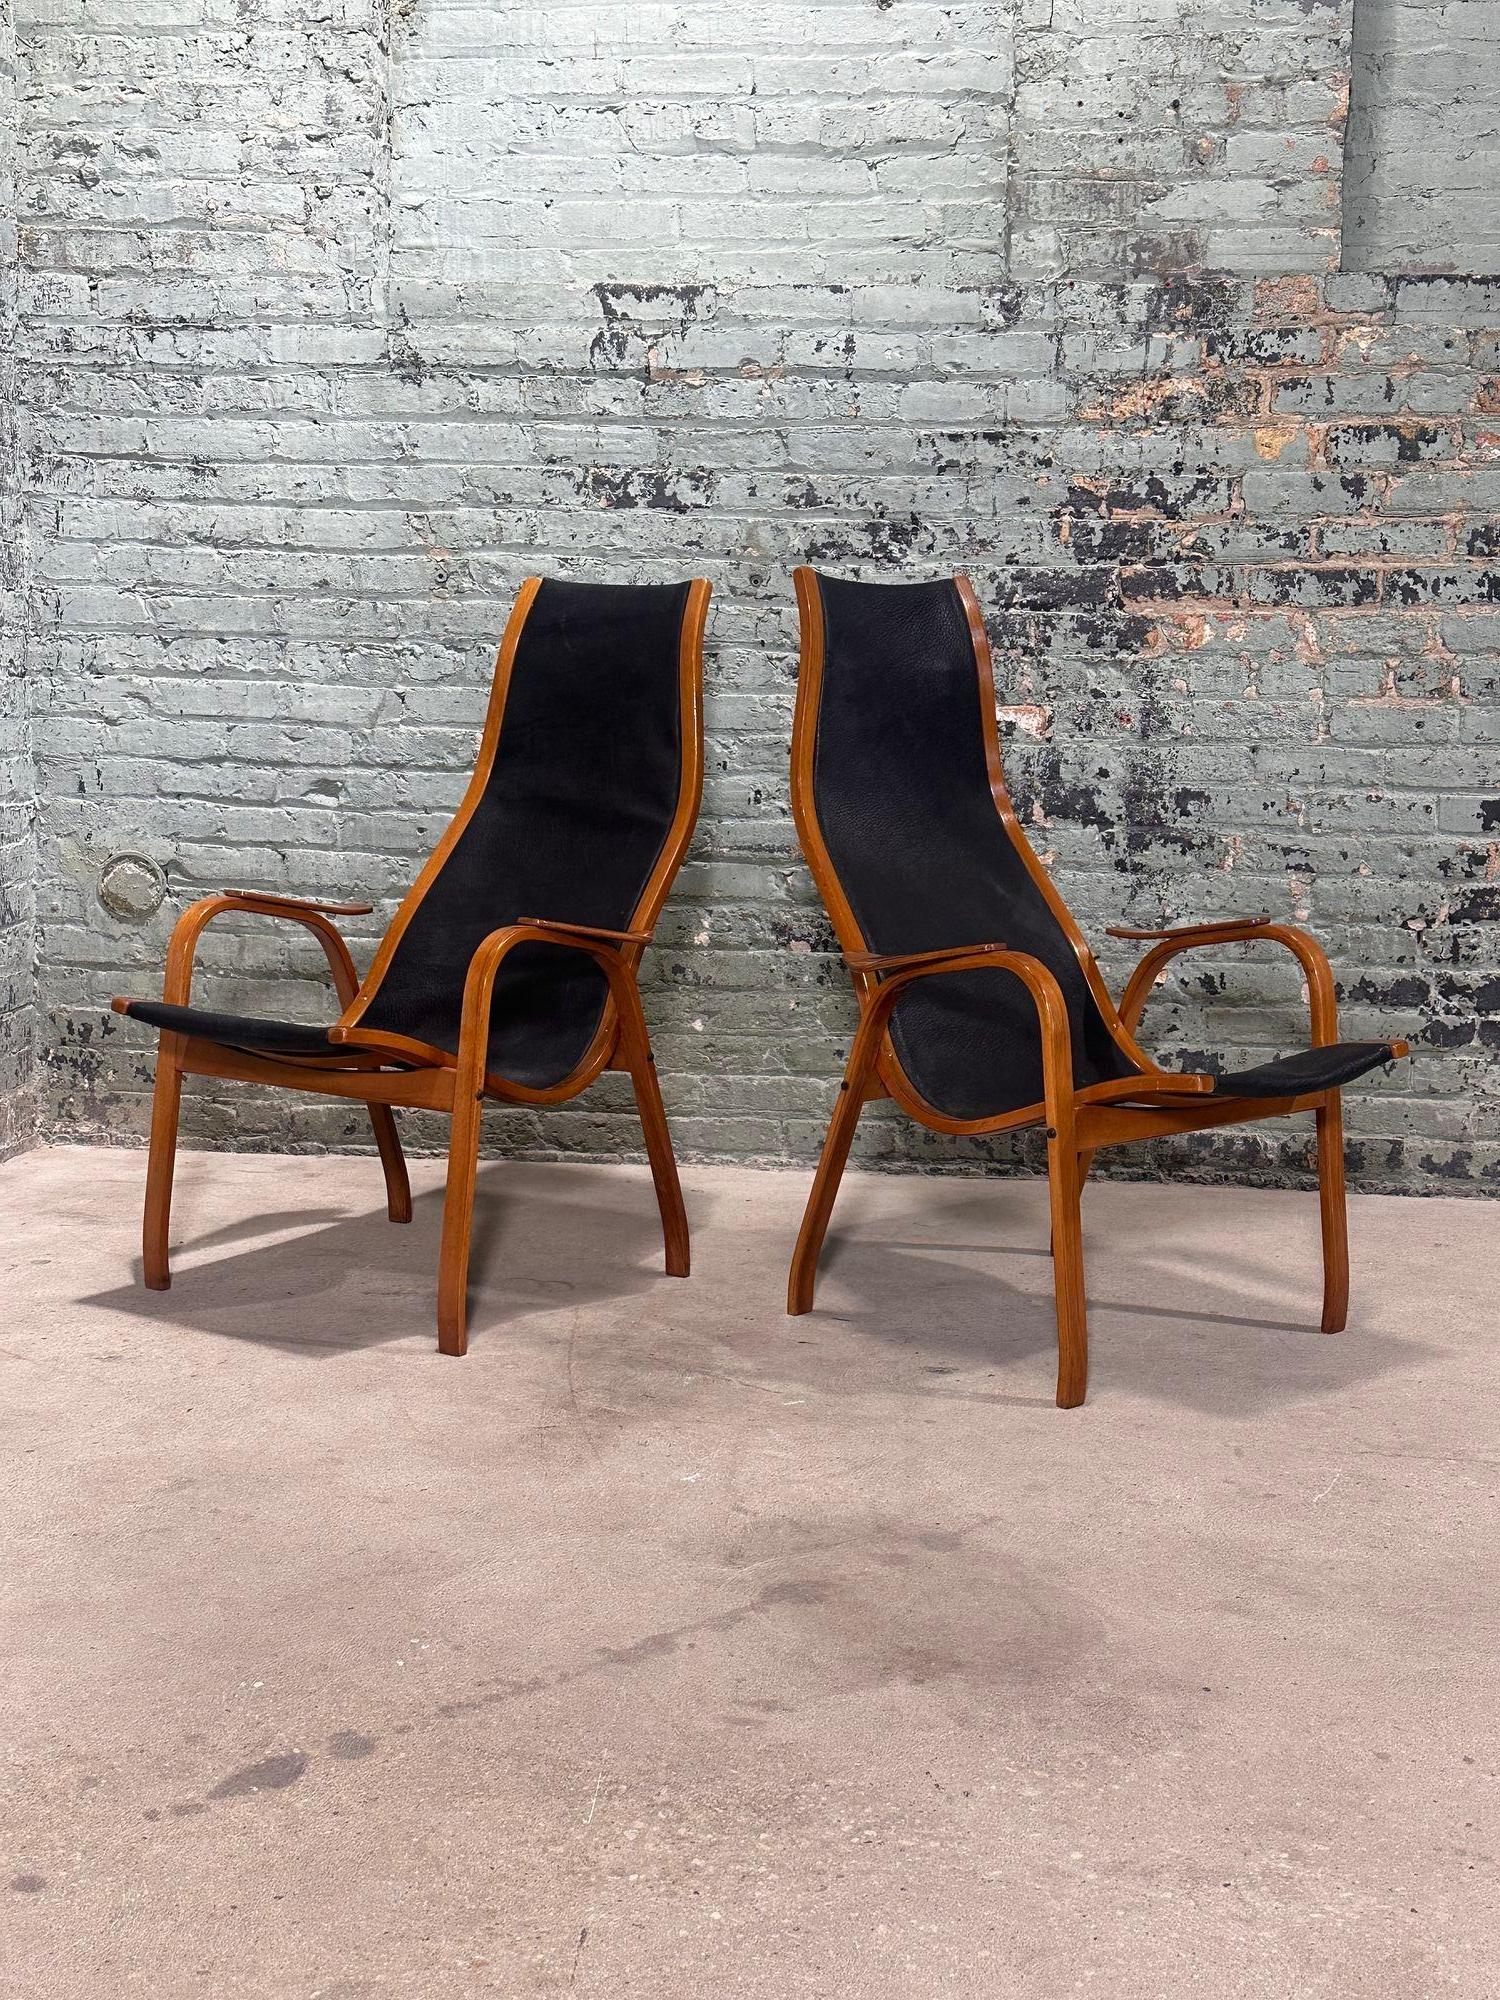 Scandinavian Lamino Leather Lounge Chairs by Yngve Ekstrom for Swedese, 1950's. Restored and also have new black leather.
The Lamino Chair by Yngve Ekstrom for Swedese is a classic piece of Scandinavian Design. Chairs have curved wooden frames with